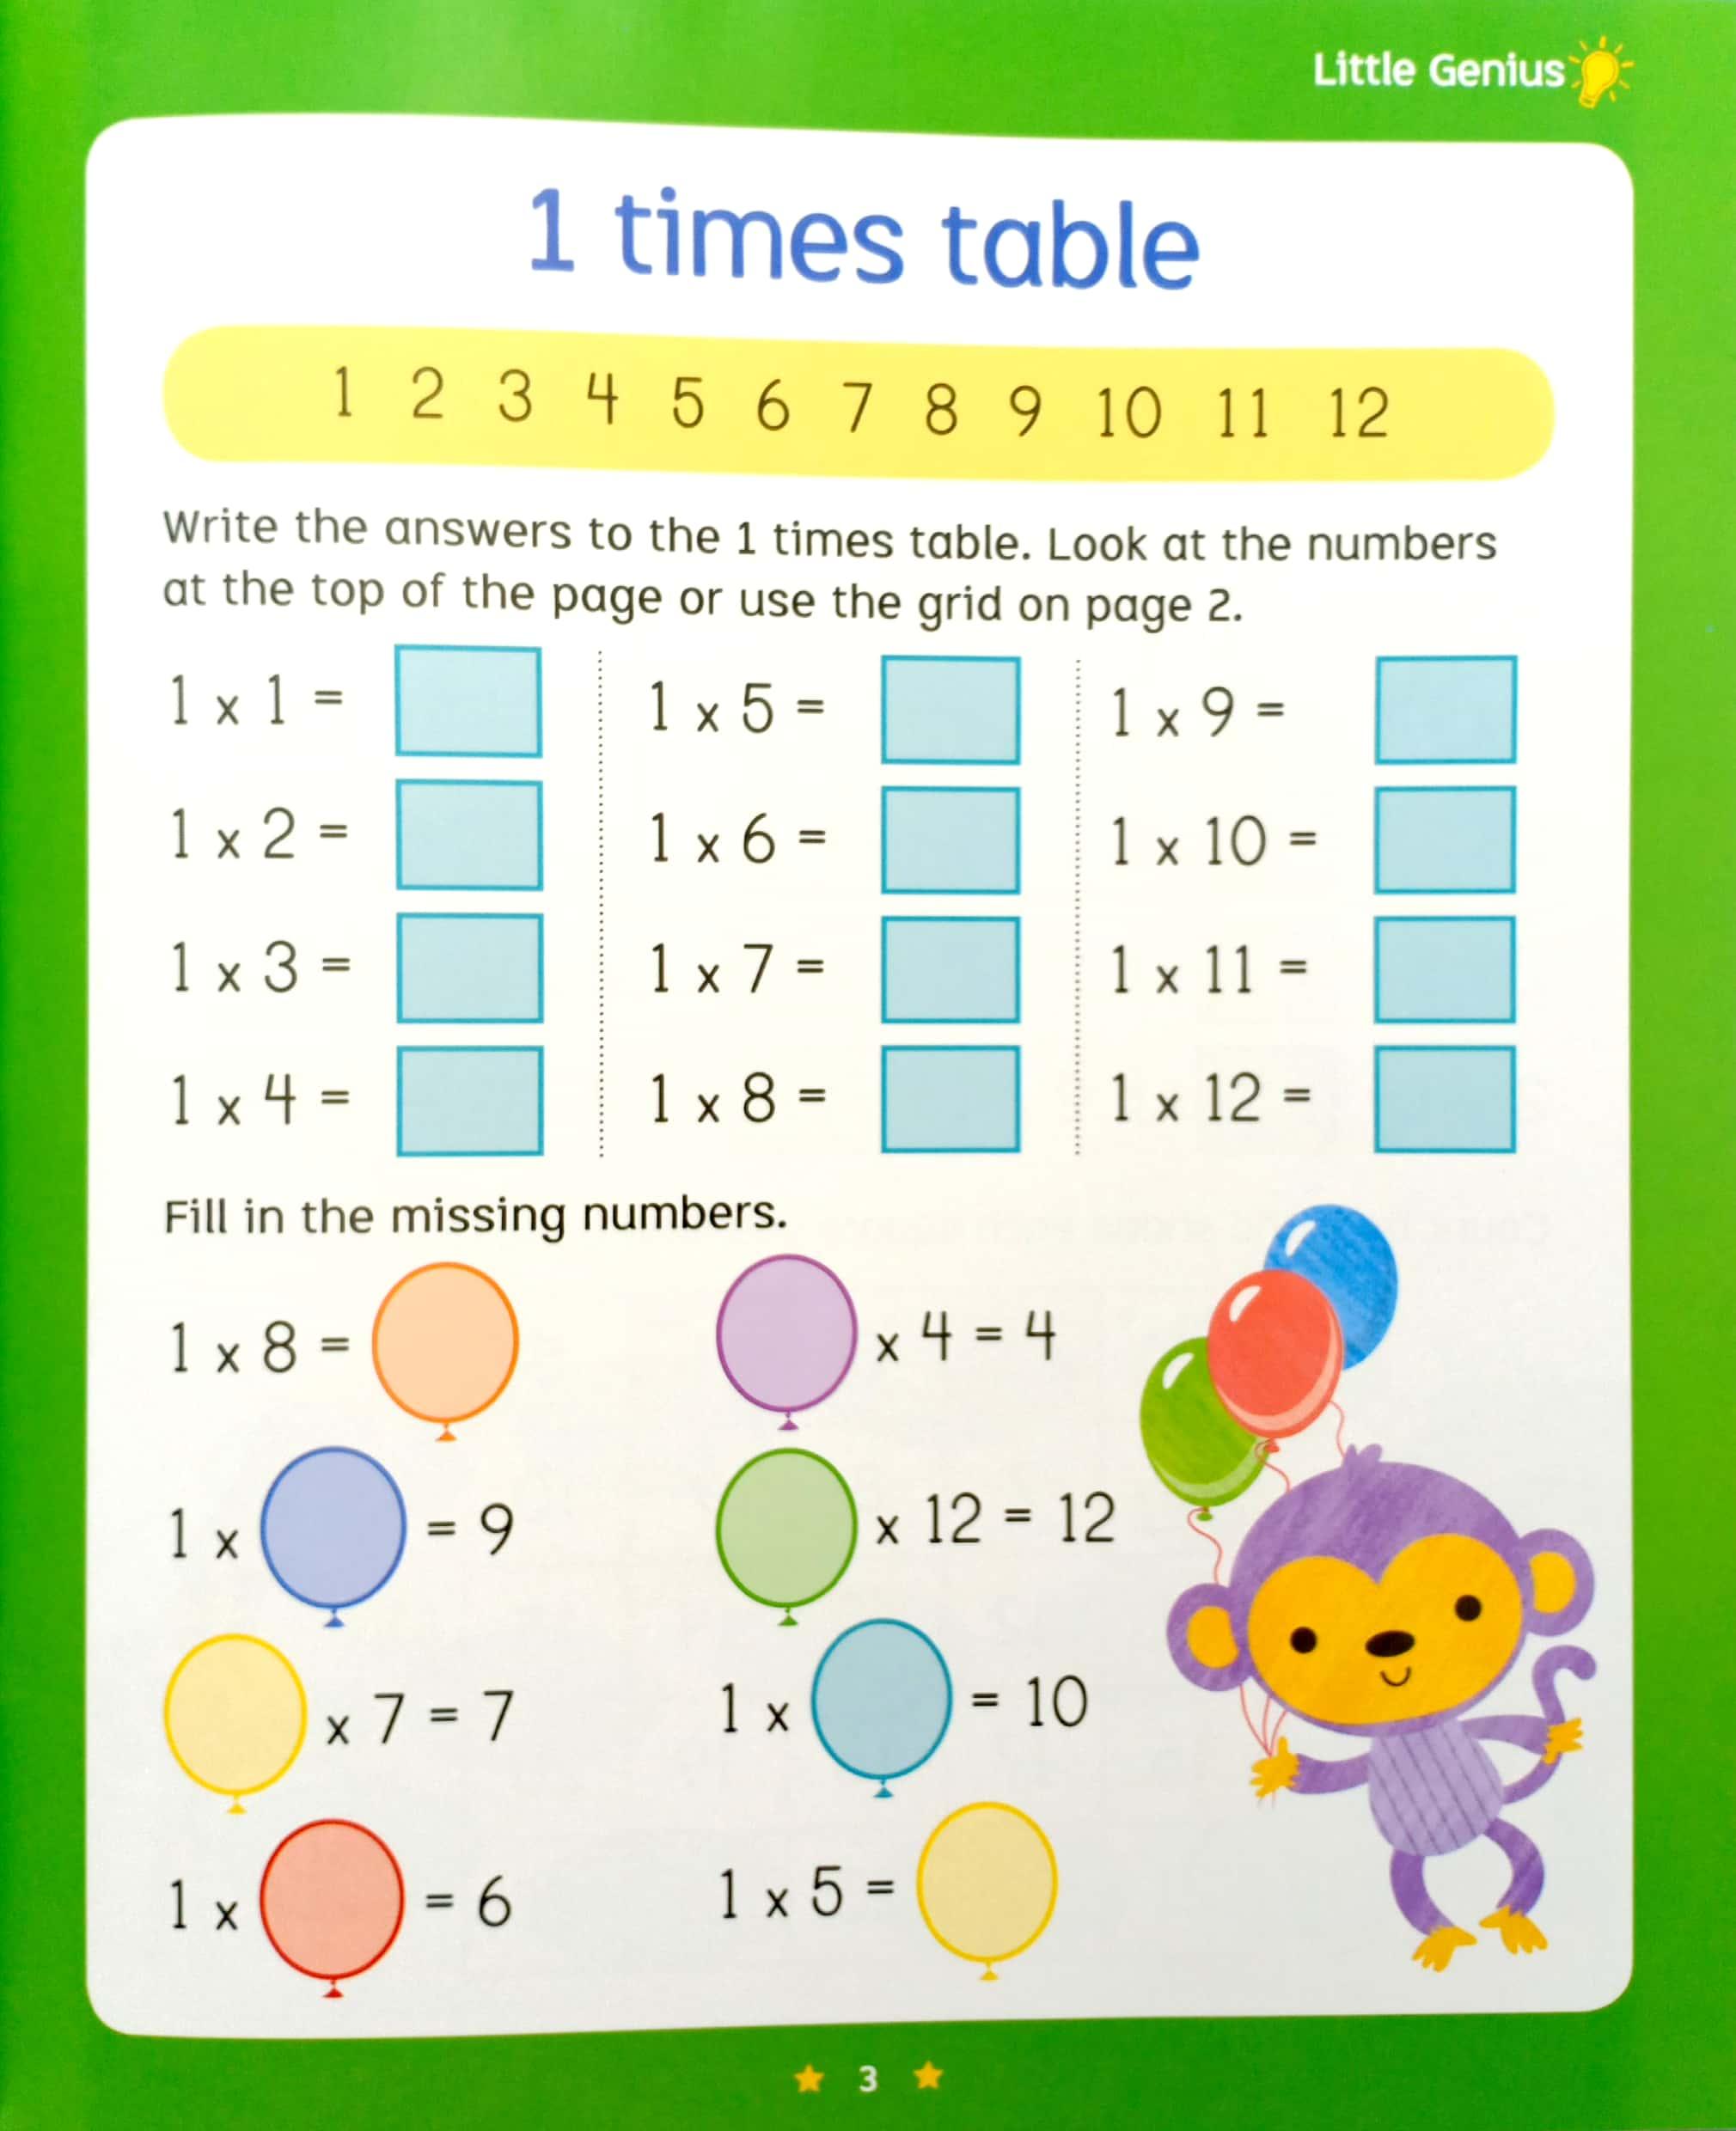 Little Genius Times Table - Magnetic Board & Magnets